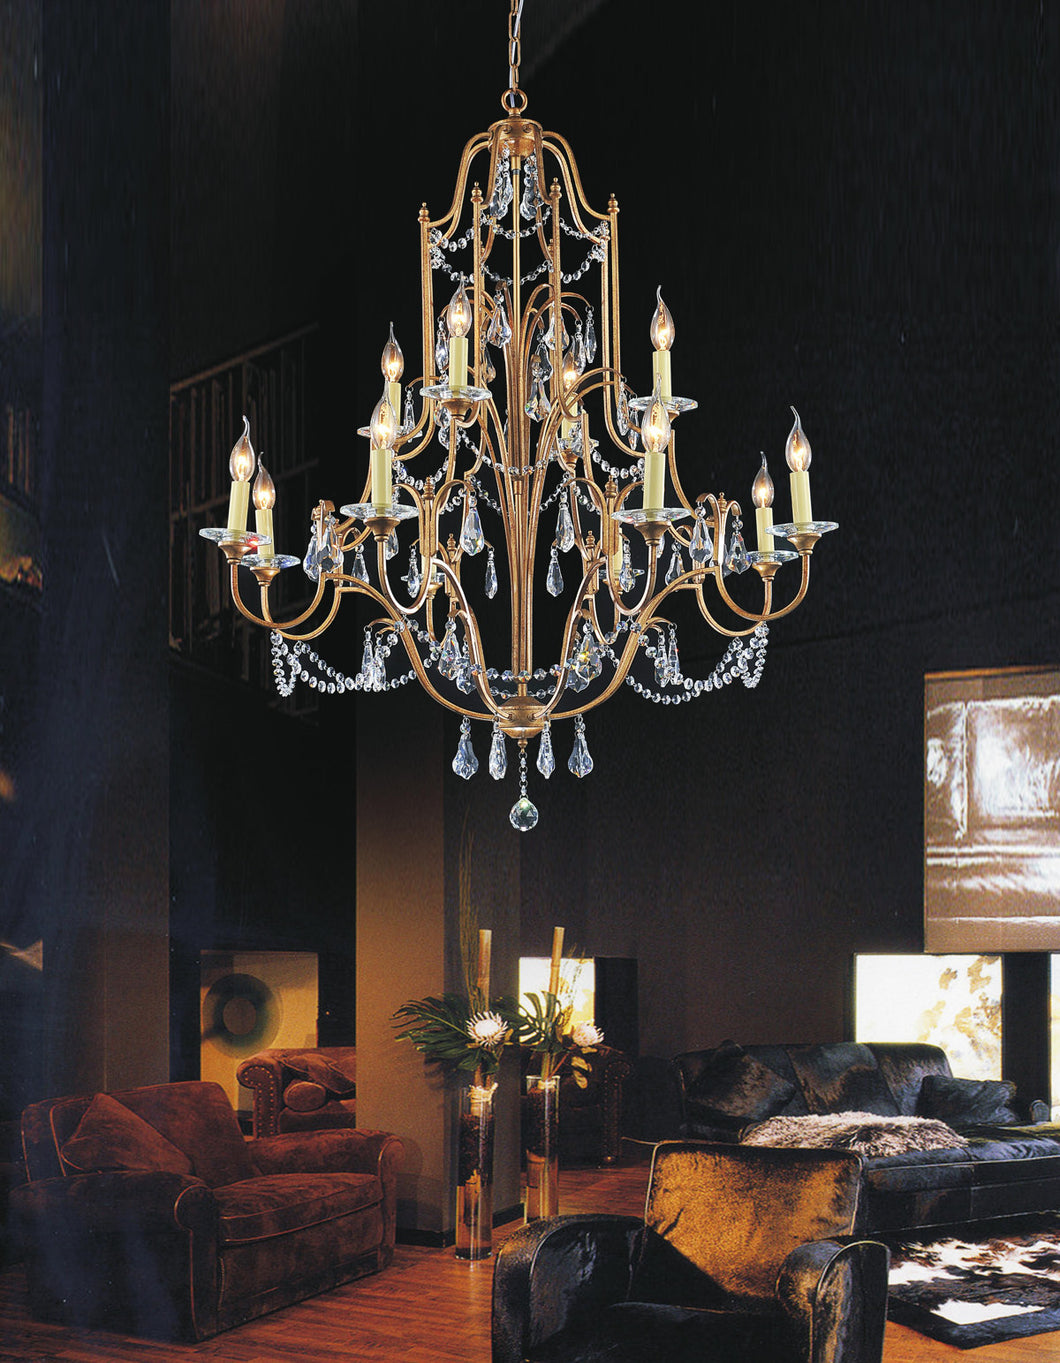 12 Light Up Chandelier with Oxidized Bronze finish